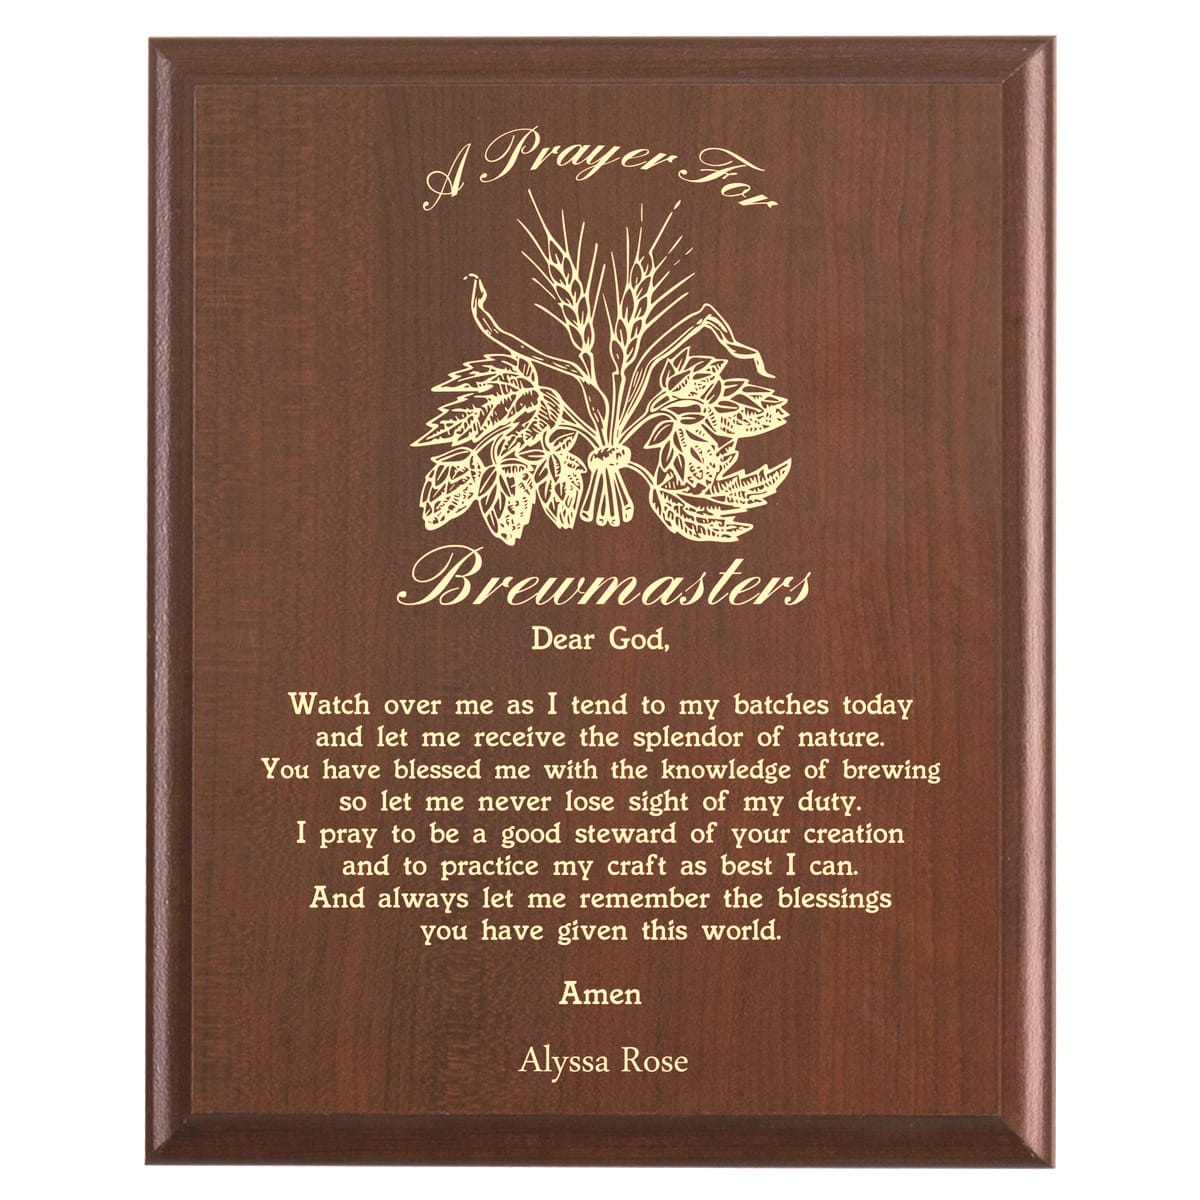 Plaque photo: Brewmaster Prayer Plaque design with free personalization. Wood style finish with customized text.